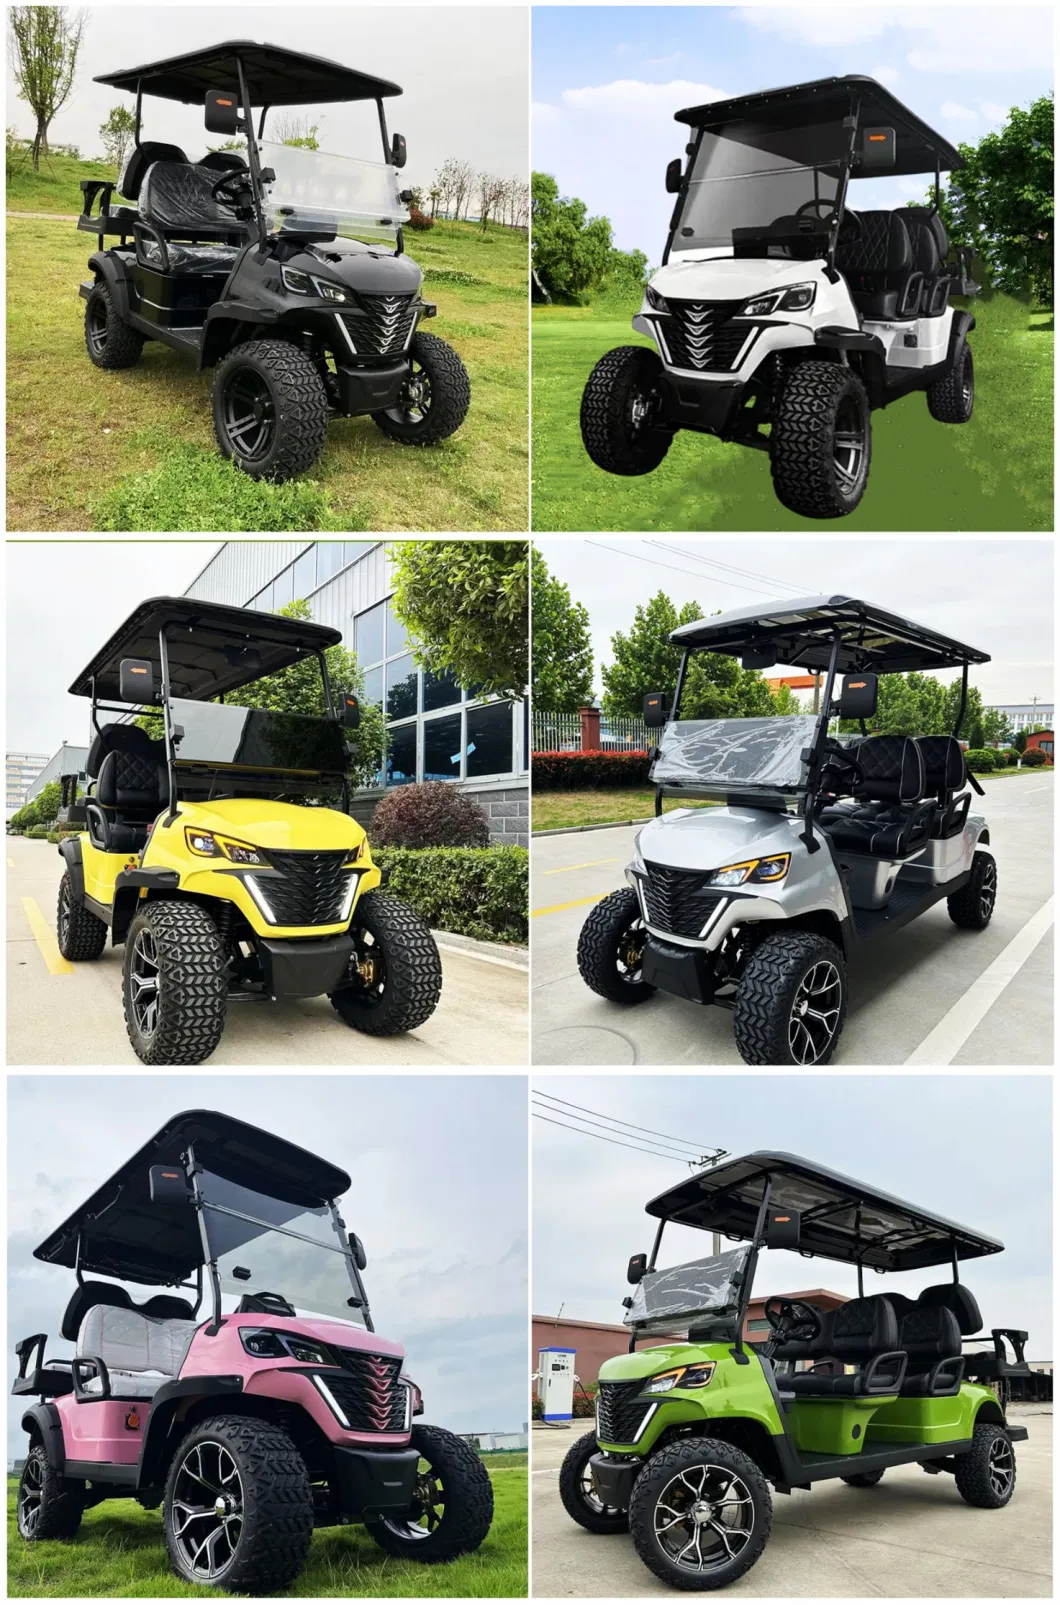 China Manufacturer Brand New Design 4 Seat Sightseeing Bus Club Cart Lead Acid/Lithium Battery 48V/60V/72V 2, 4, 6, 8, 10 Seats/Seater Hunting Golf Cart